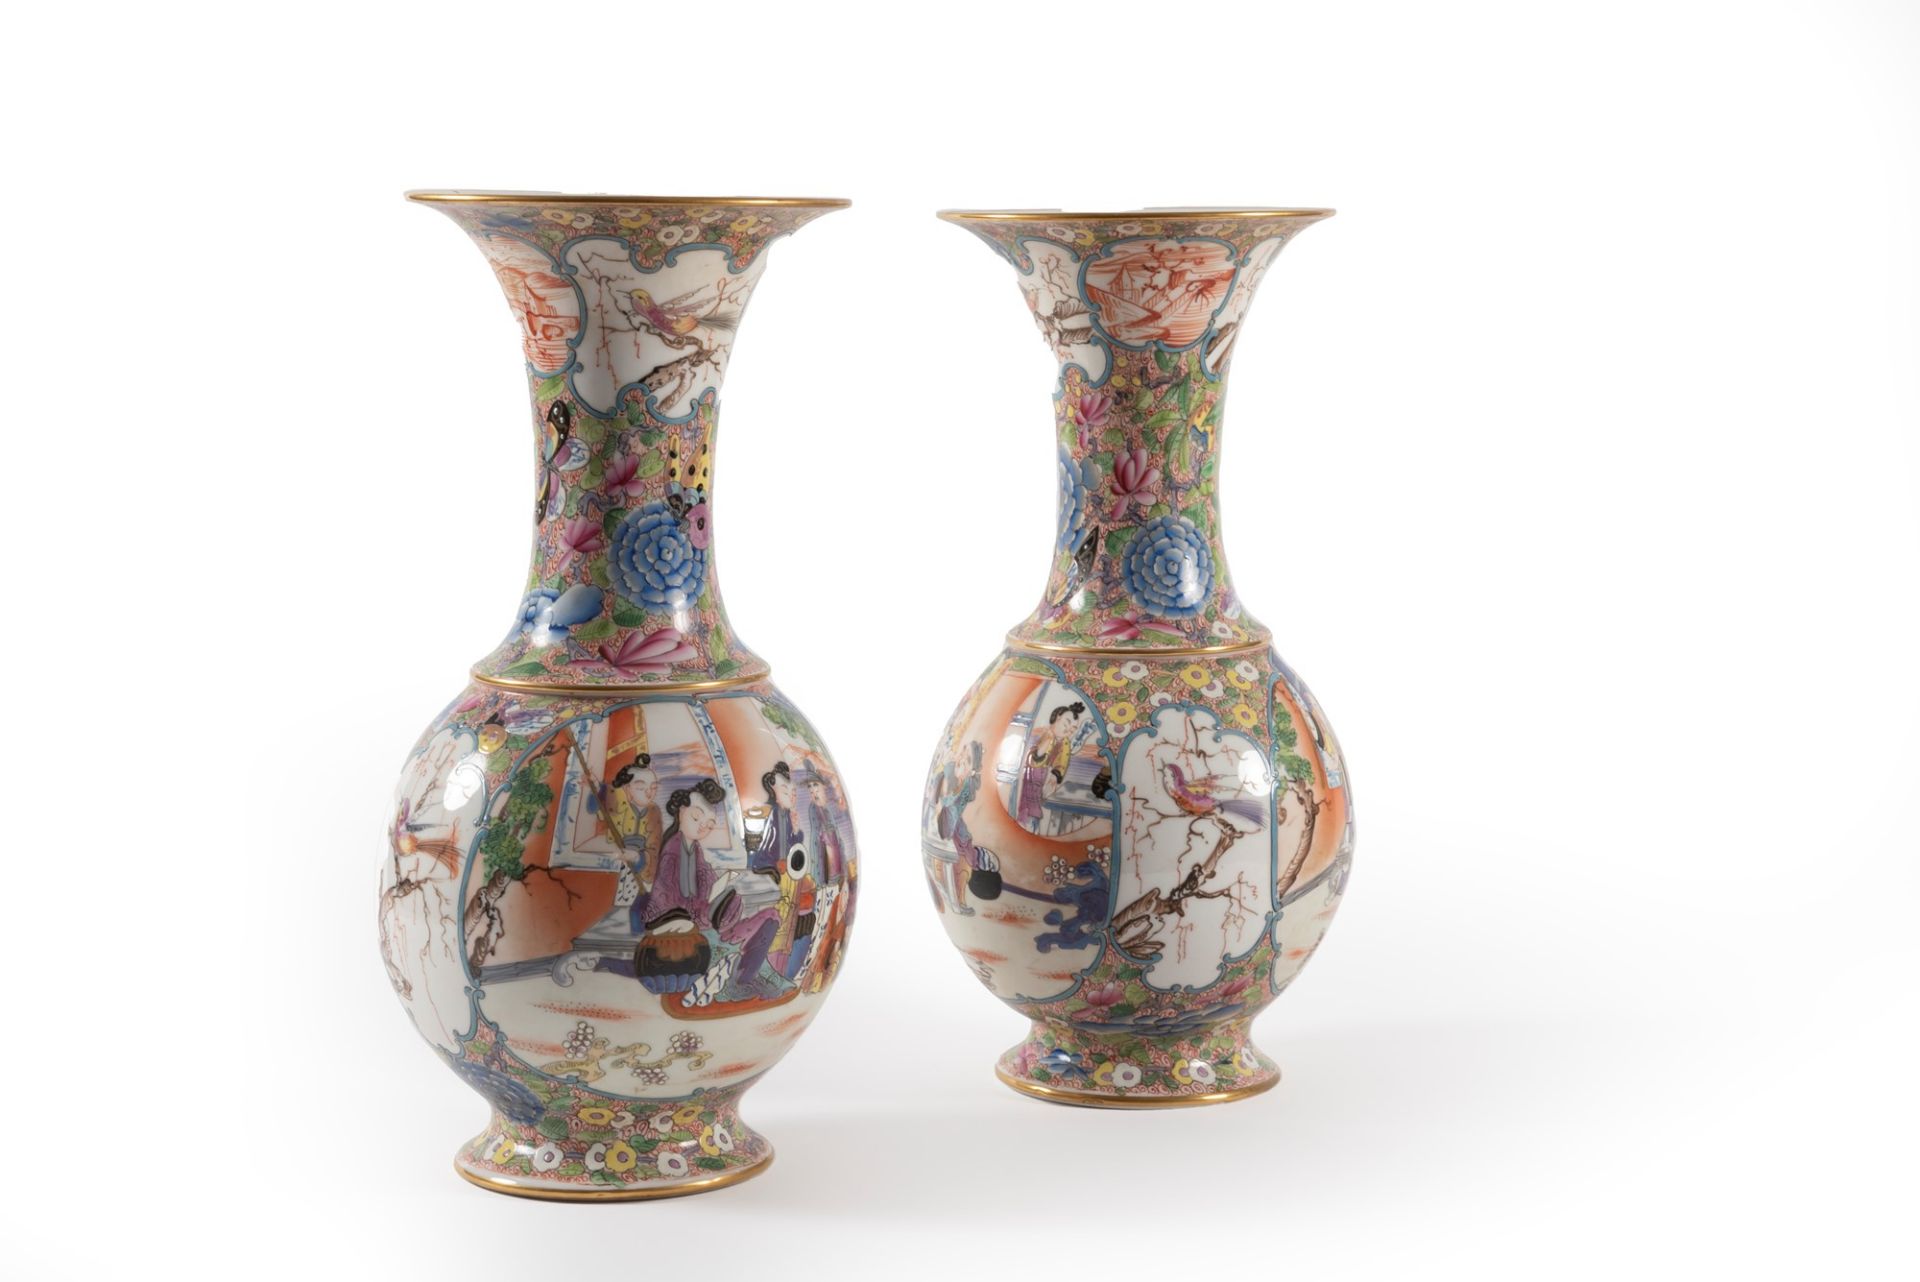 A pair of polychrome porcelain vases, oriental style, 19th century